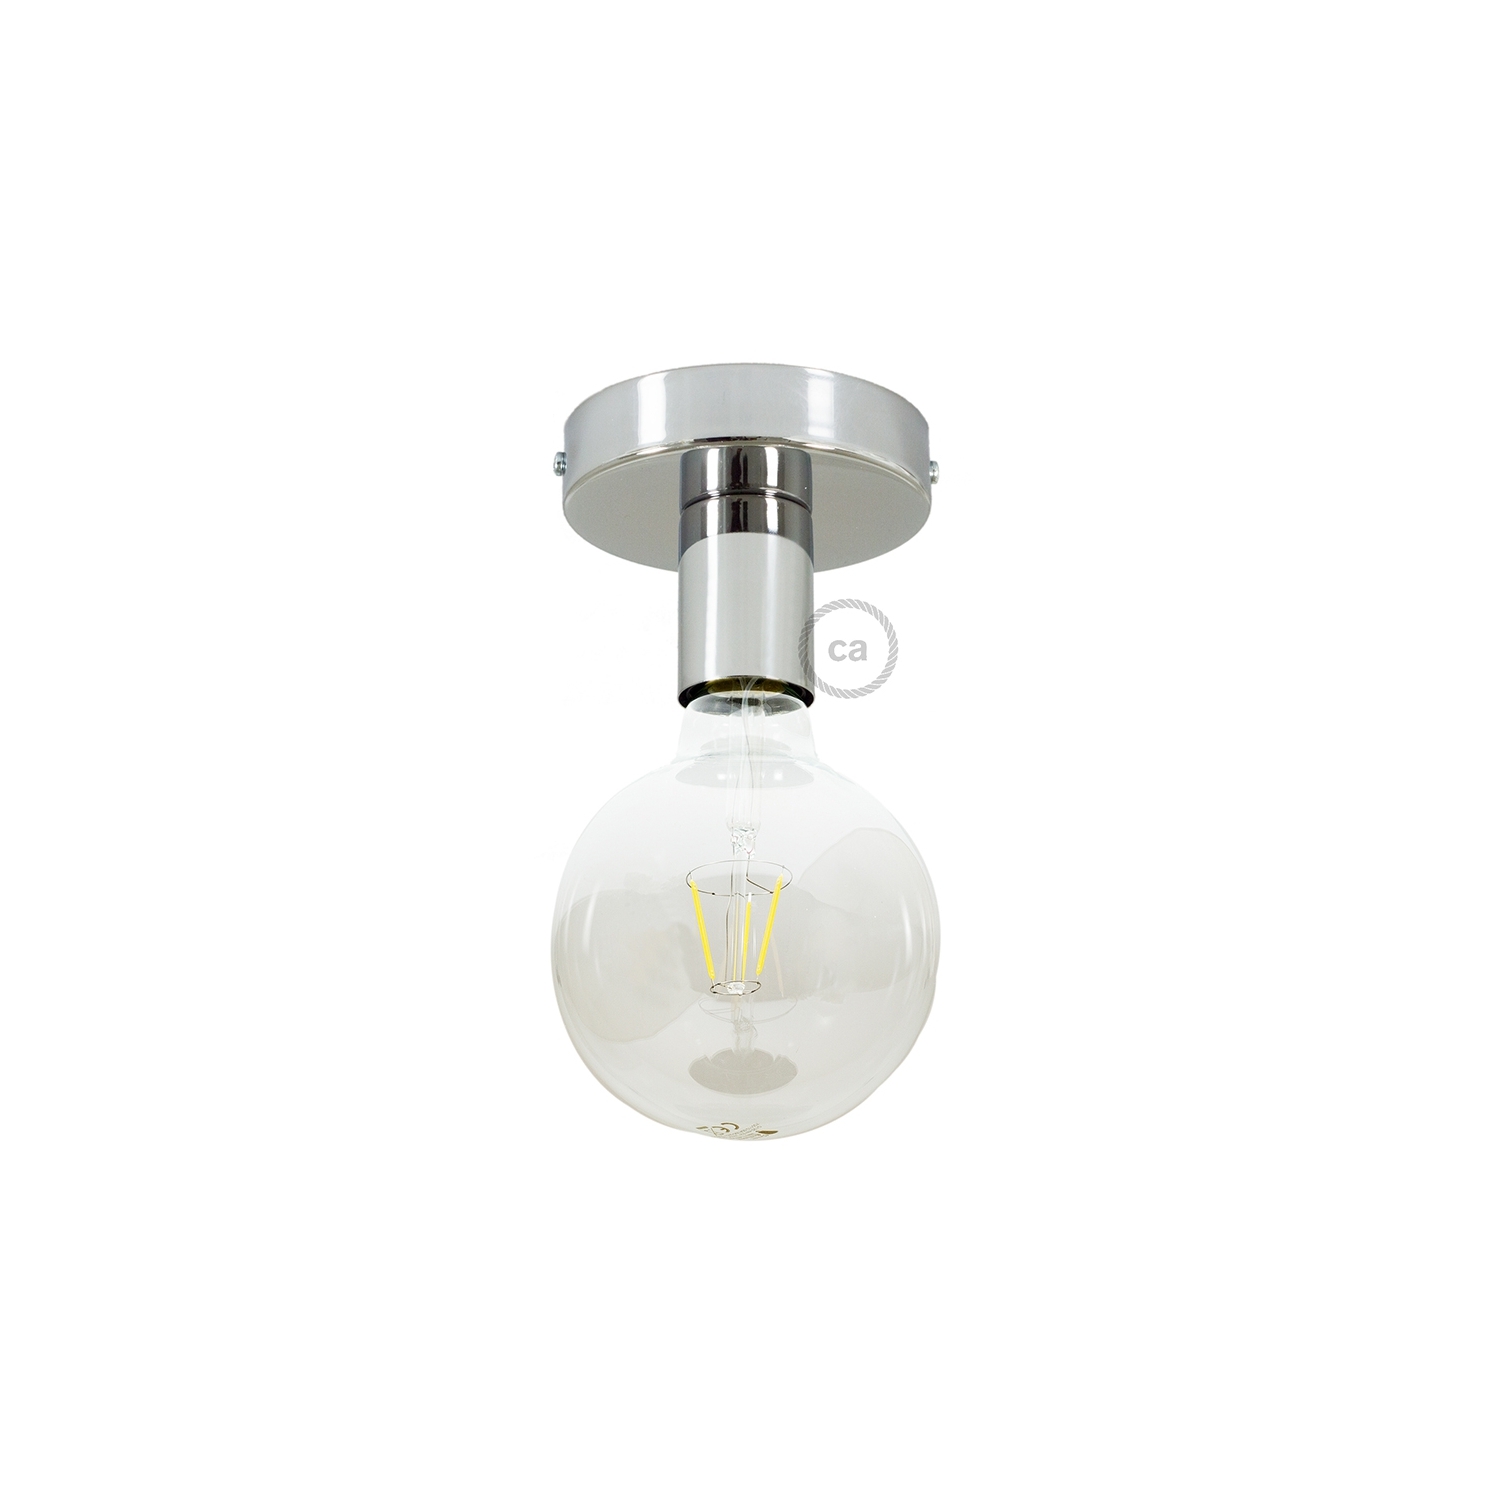 Fermaluce, the chrome metal wall or ceiling light source.